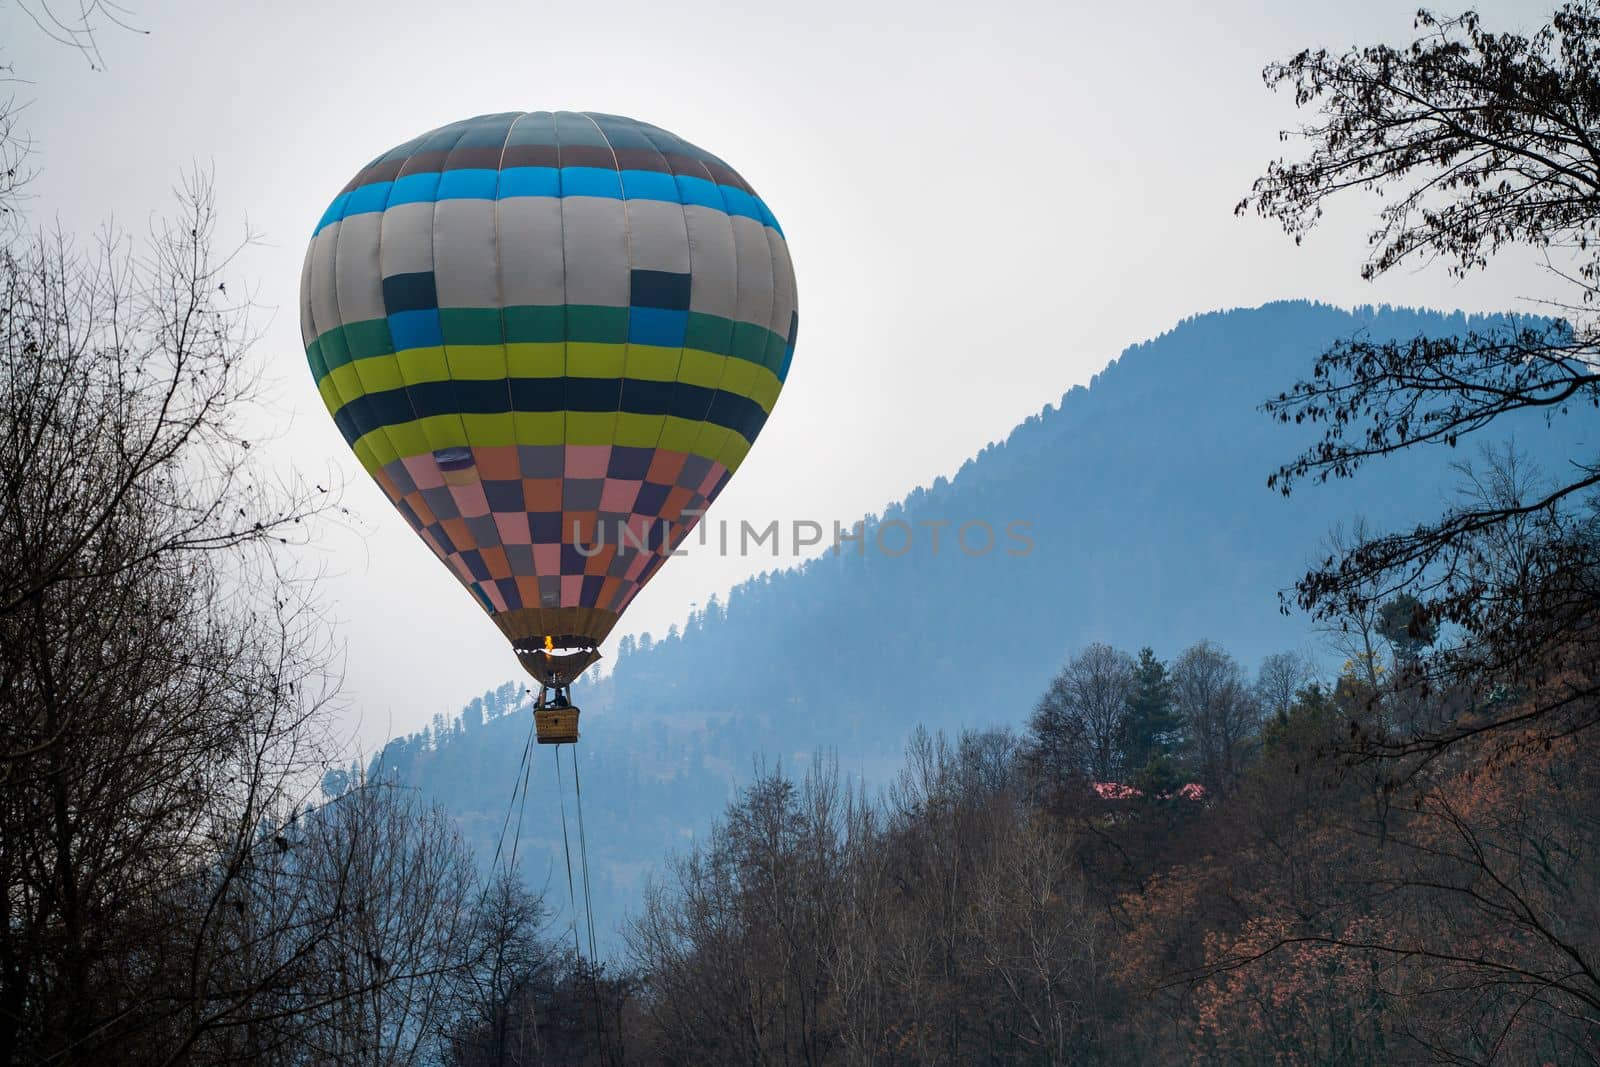 Hot air balloon with fire heating air in wicker basket with himalaya mountains in background showing this adventure in kullu manali valley India